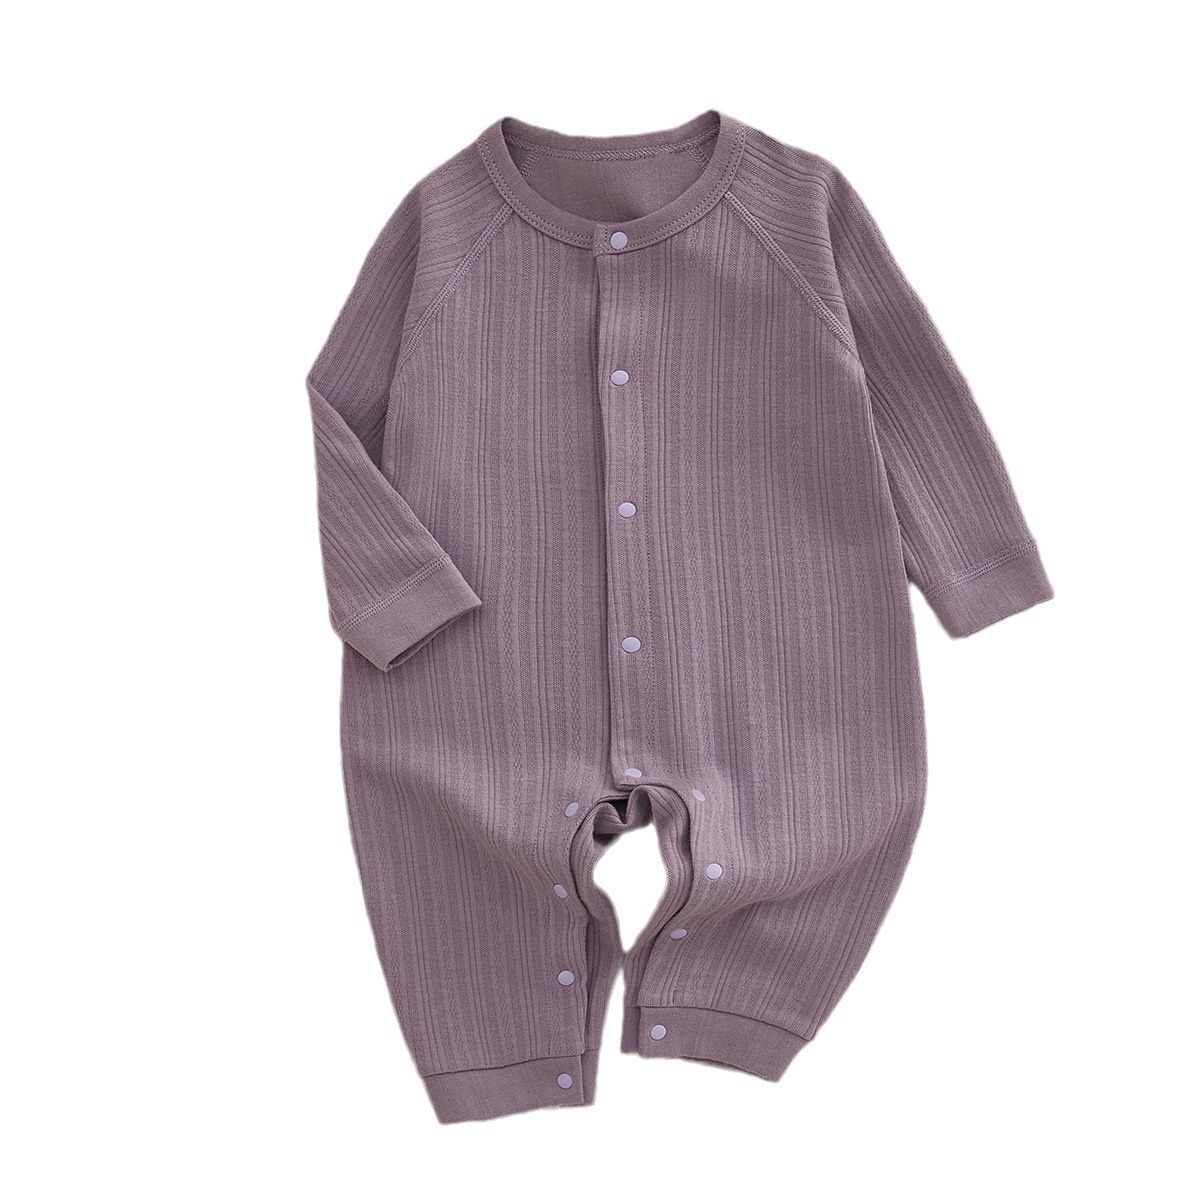 Baby Clothes Spring and Autumn Boneless Romper Baby Romper Long Sleeve Comfortable Cotton Children's Pajamas Baby Jumpsuit